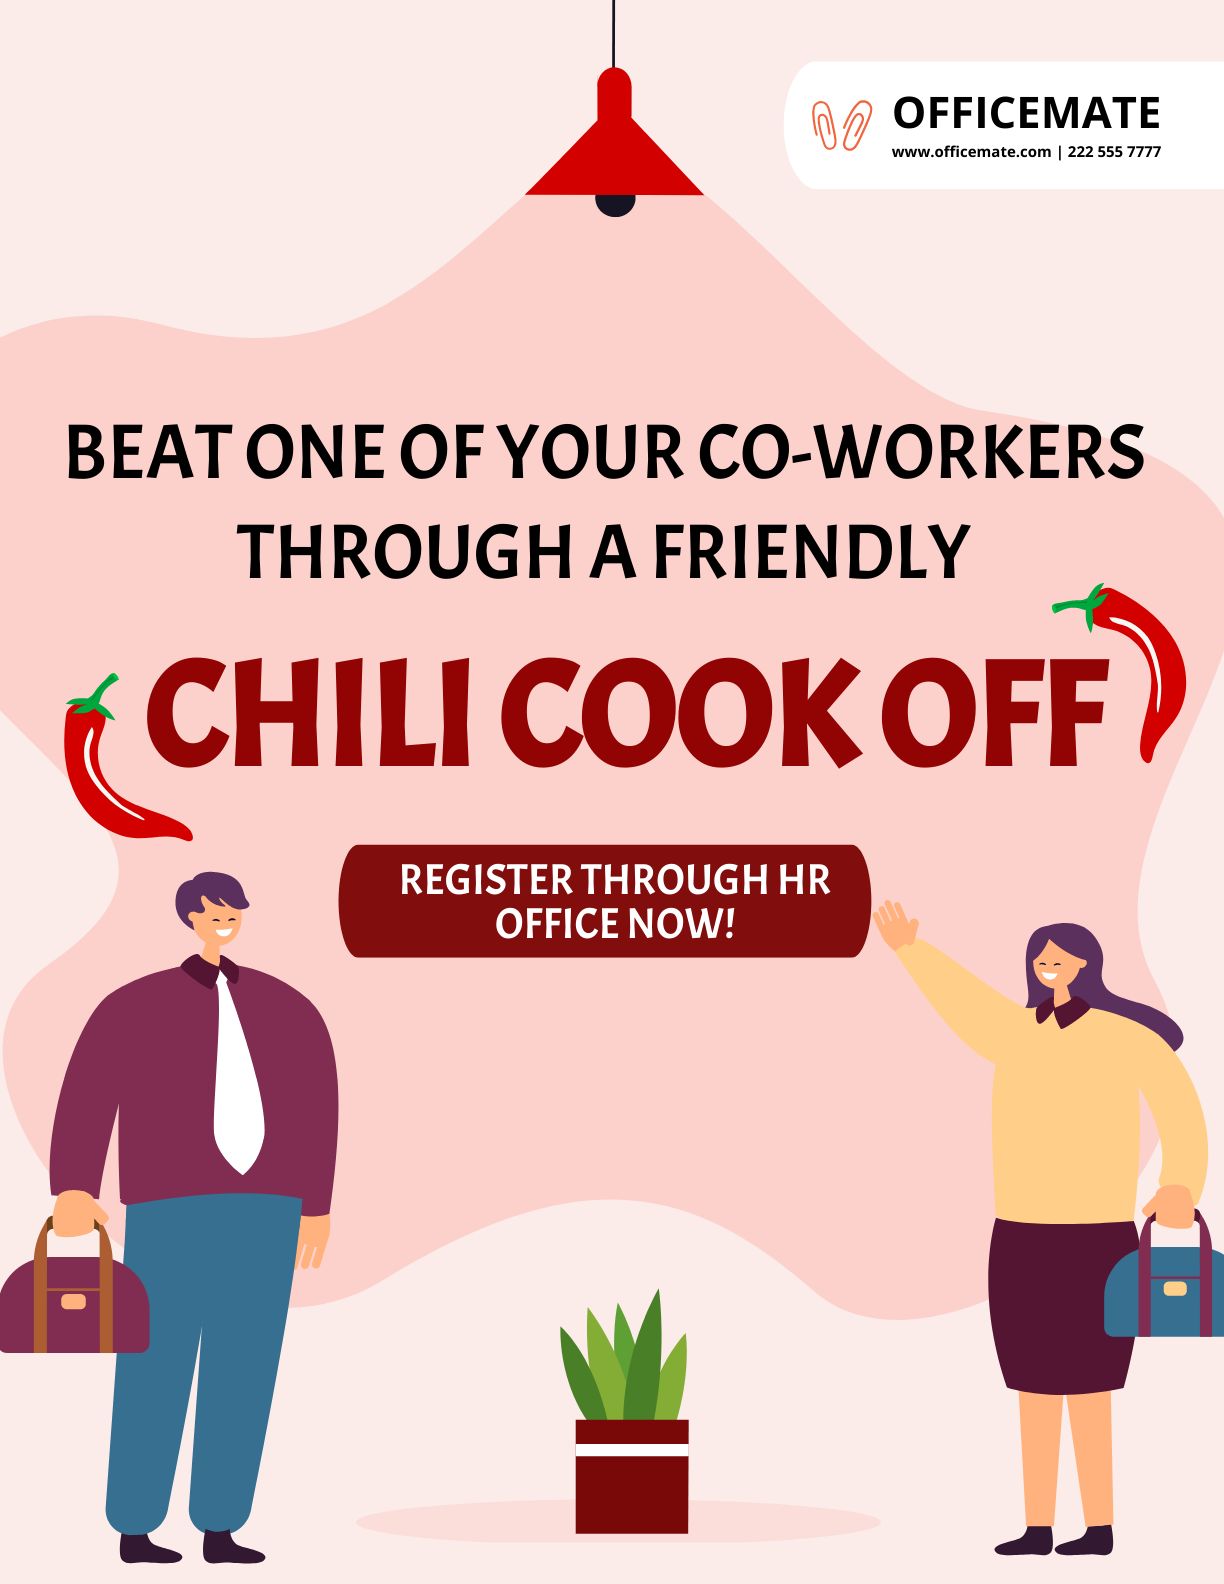 Free Office chili cook off flyer in Word, Google Docs, Illustrator, PSD, Apple Pages, Publisher